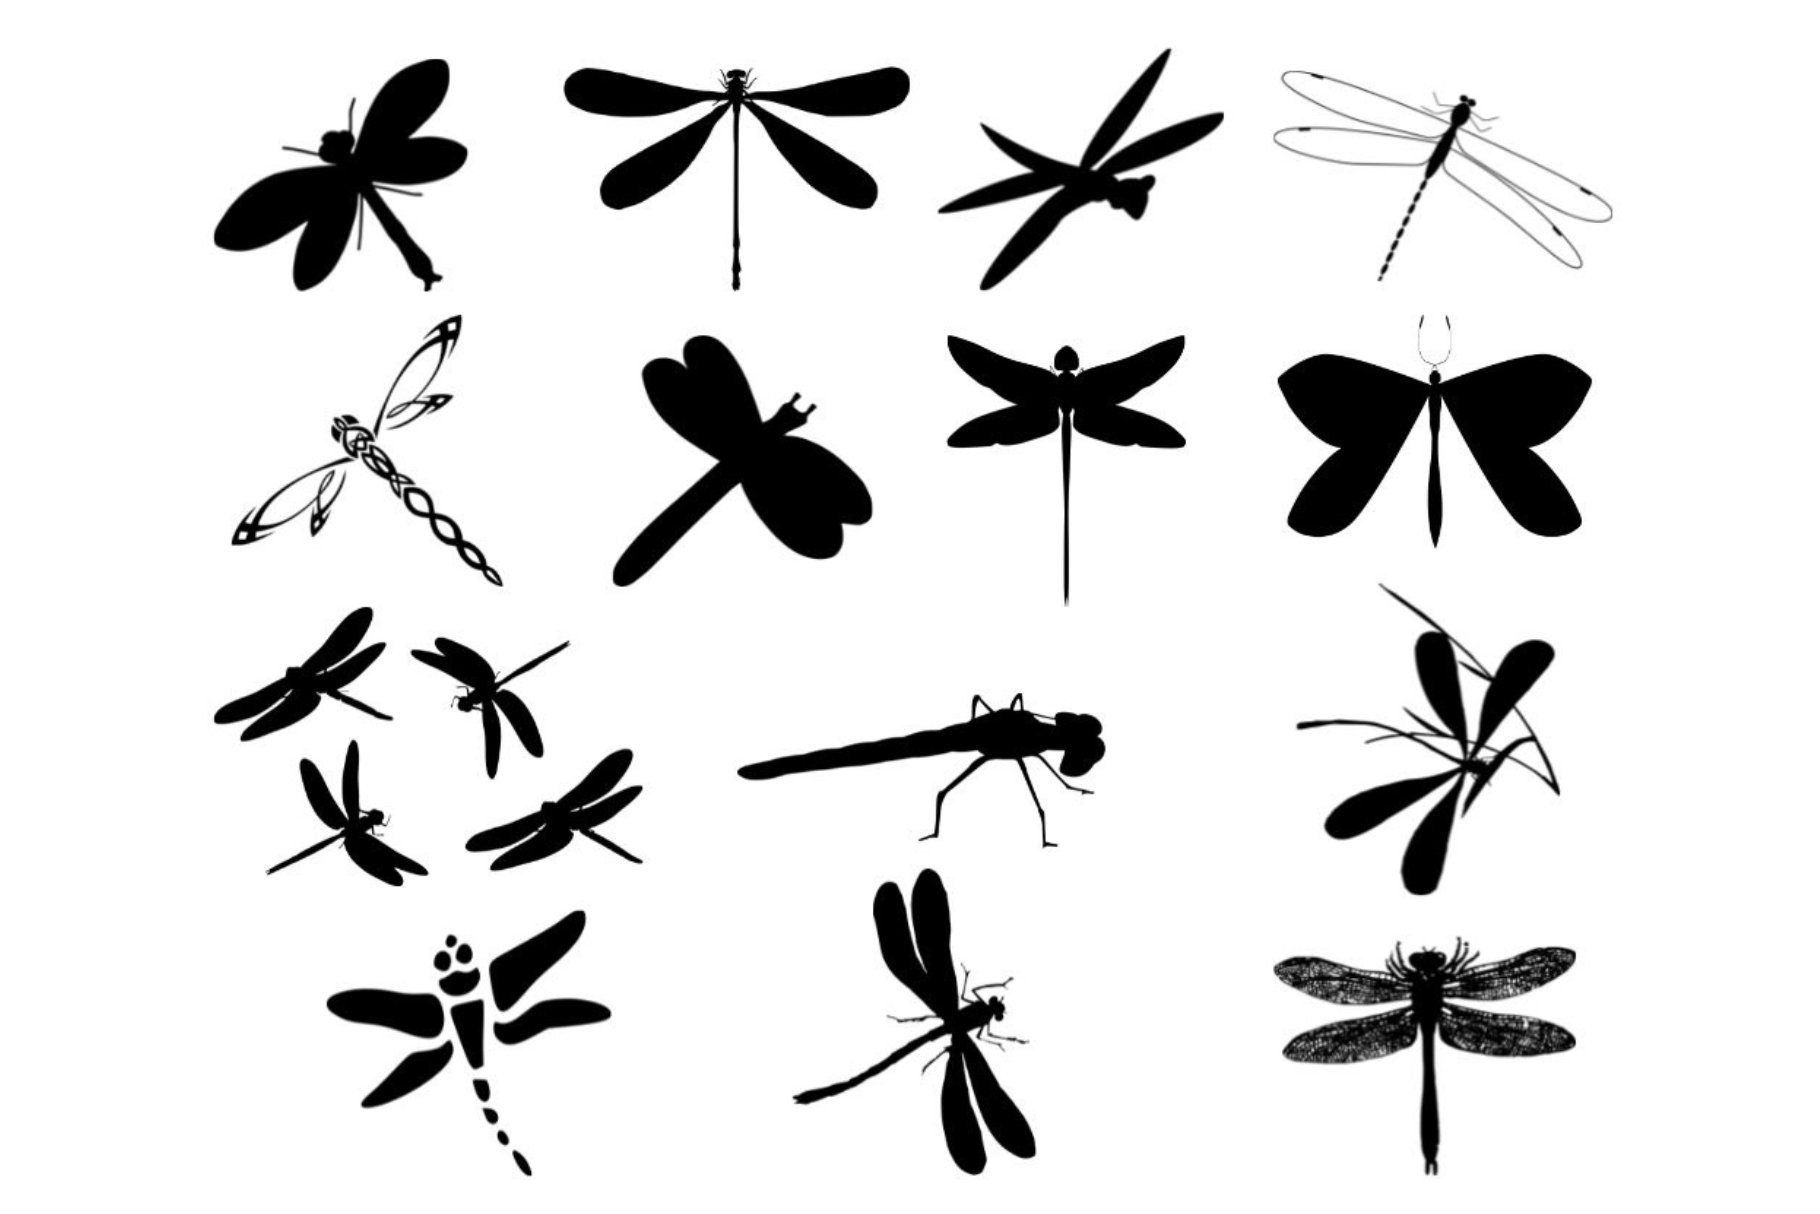 Dragonfly Silhouette cover image.